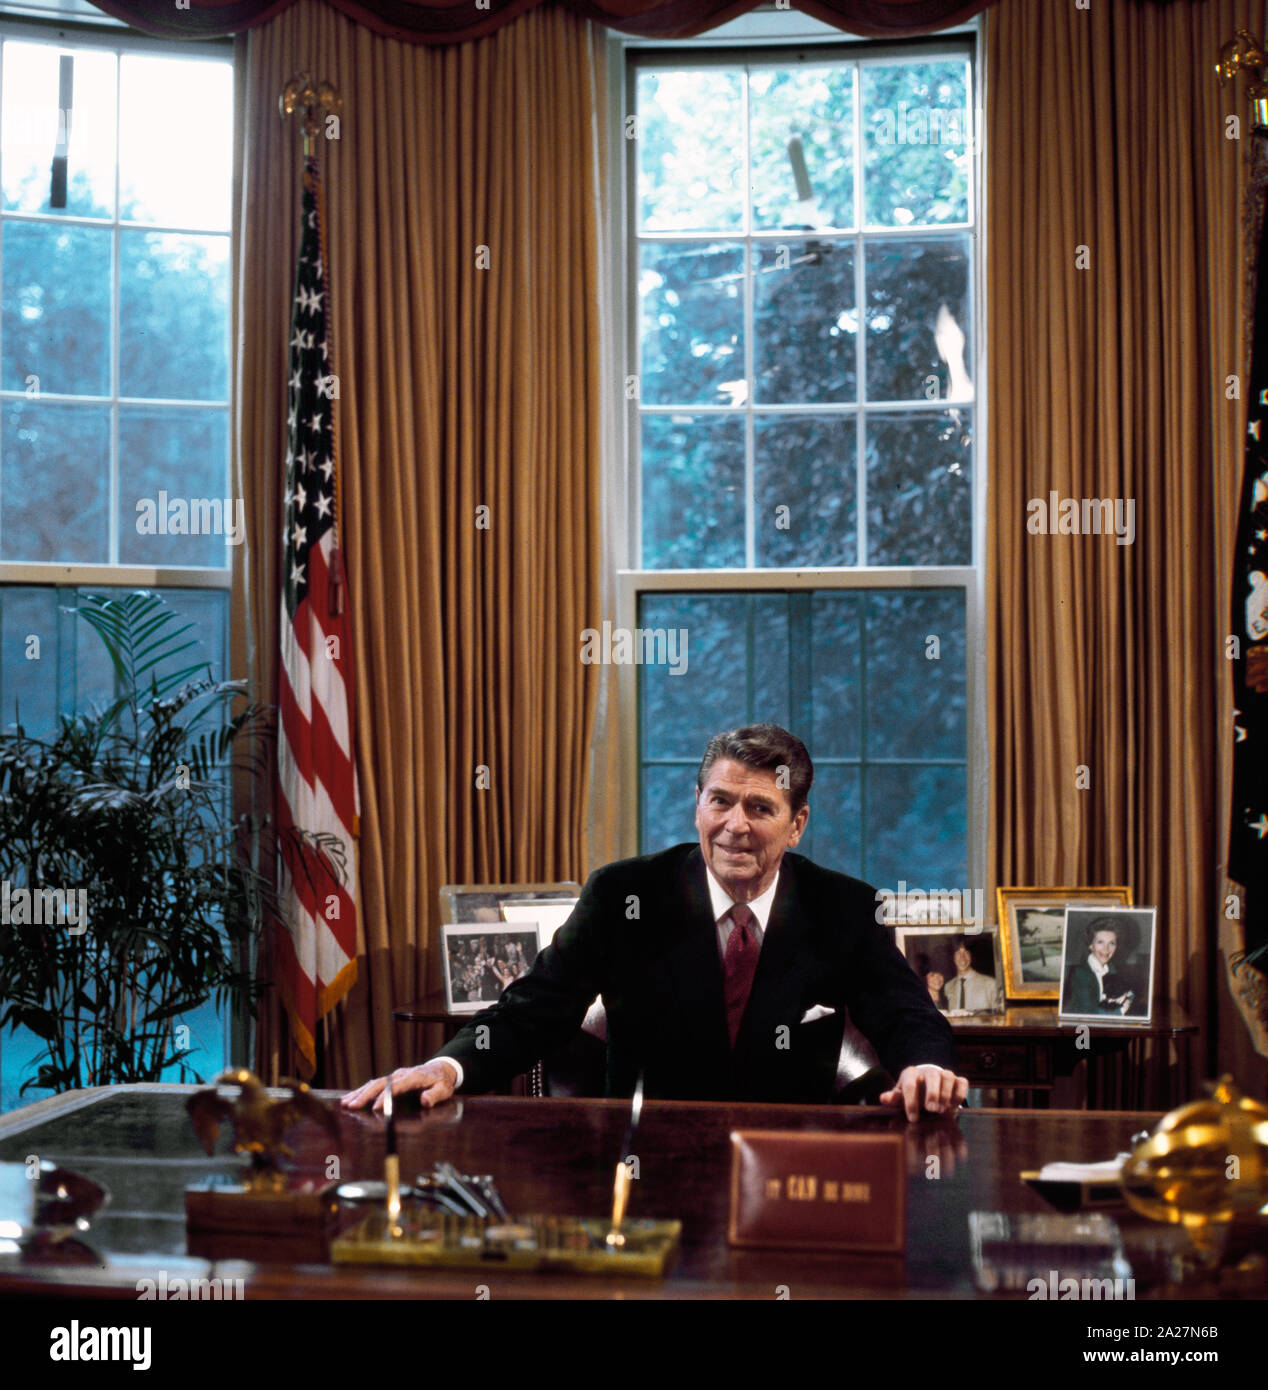 President Ronald Reagan at his desk in the Oval Office, Washington, D.C Stock Photo